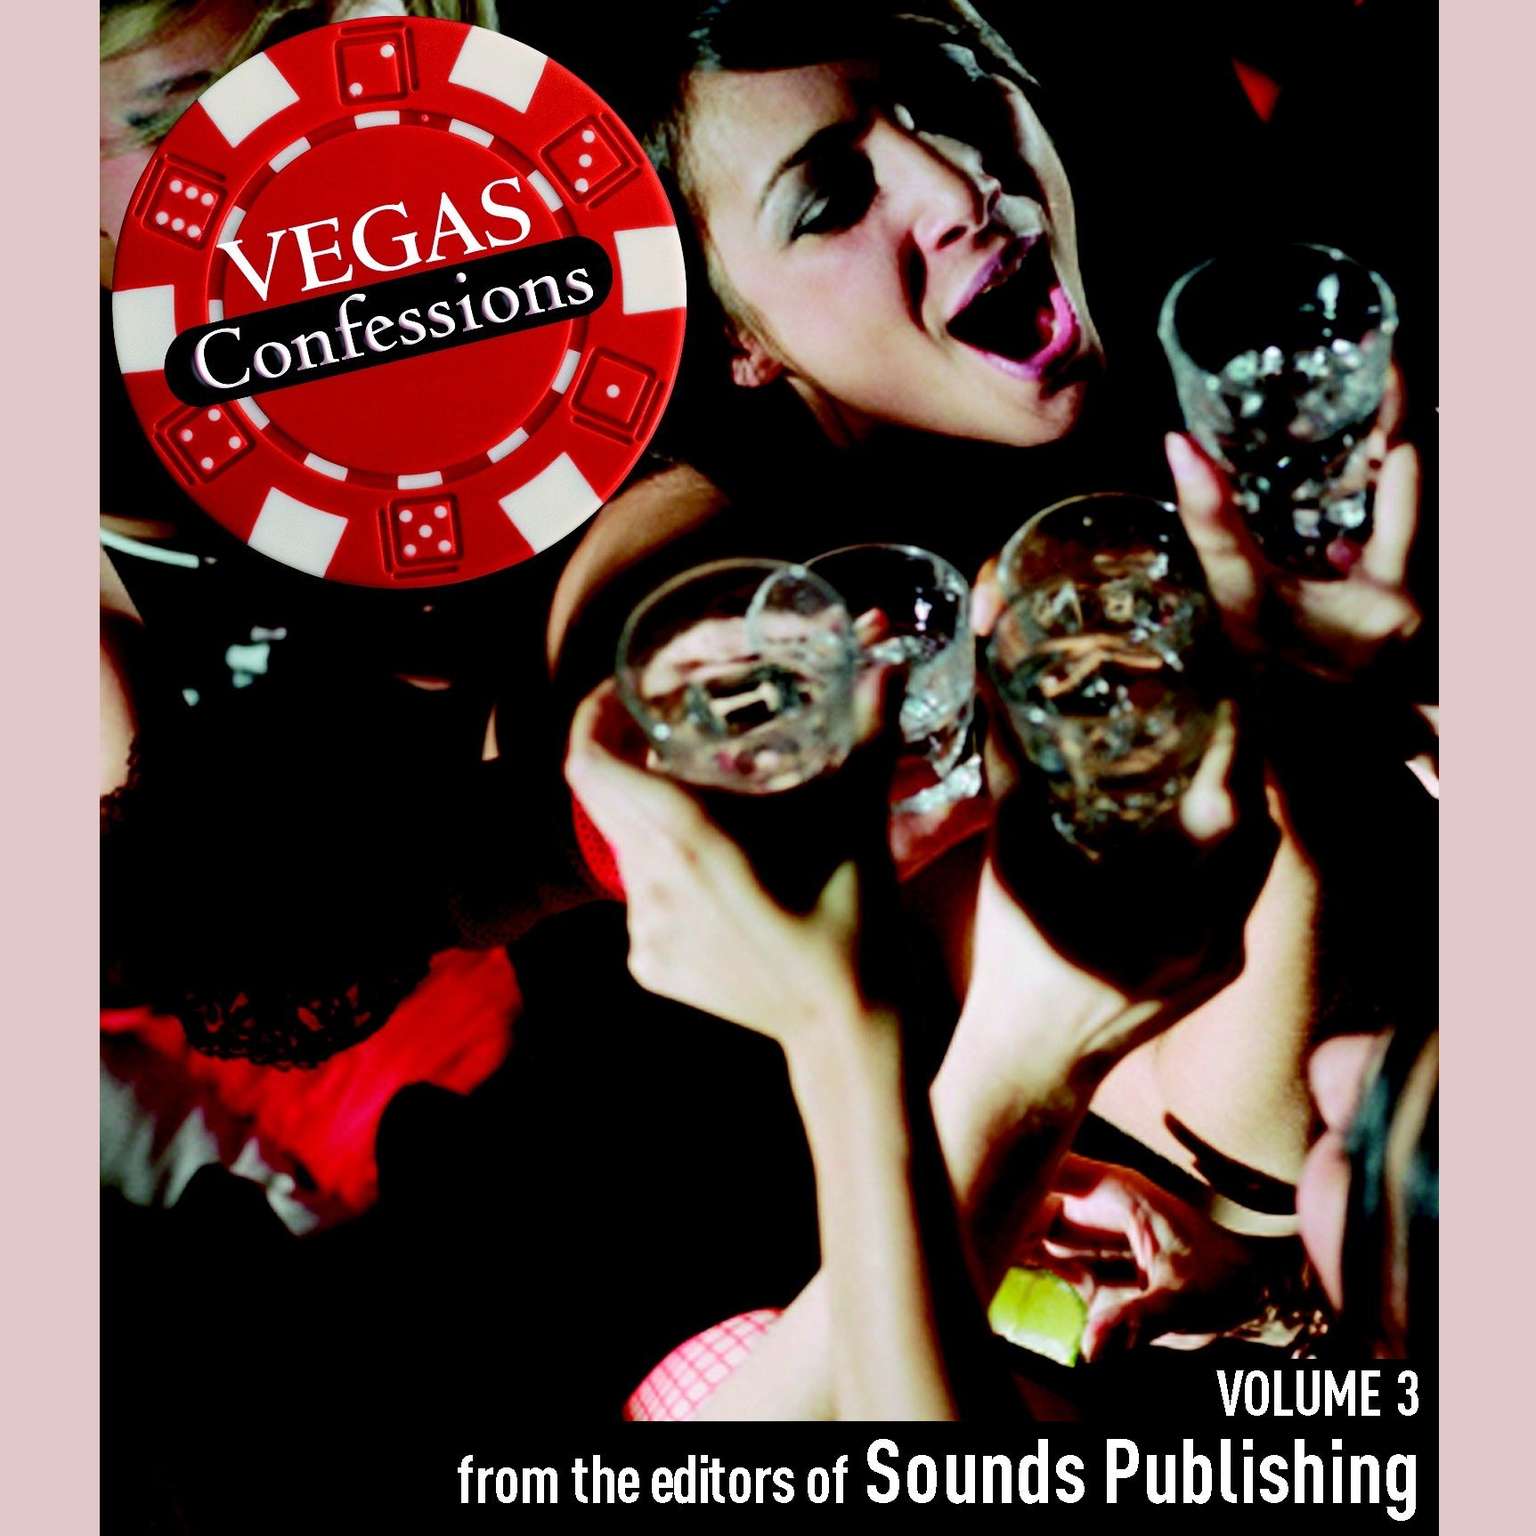 Vegas Confessions 3 Audiobook, by The Editors of Sounds Publishing